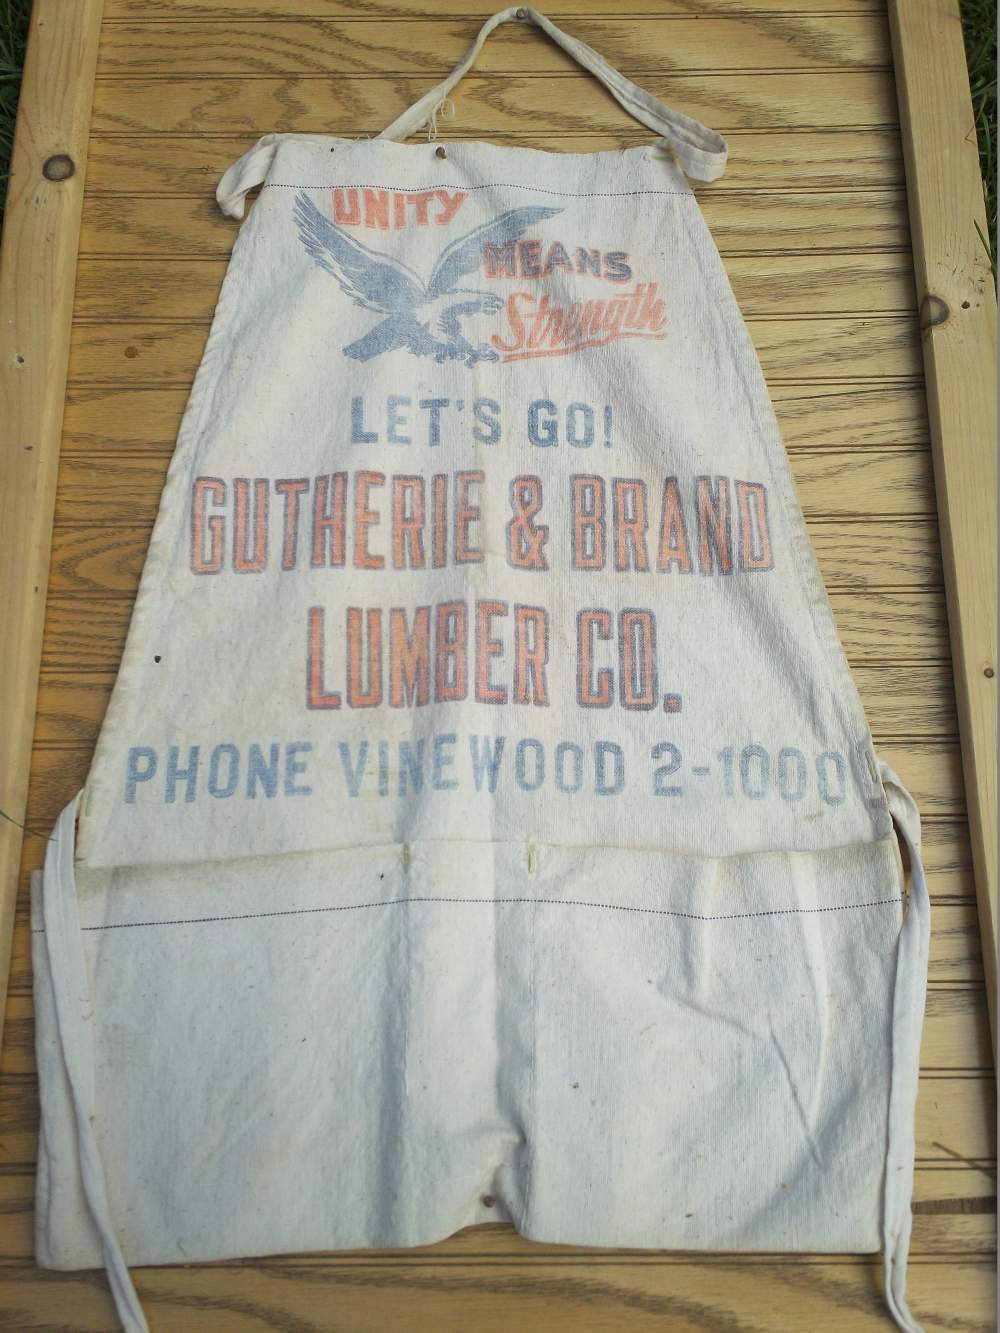 Name:  GLC Gutherie and Brand Lumber.jpg
Views: 797
Size:  142.7 KB